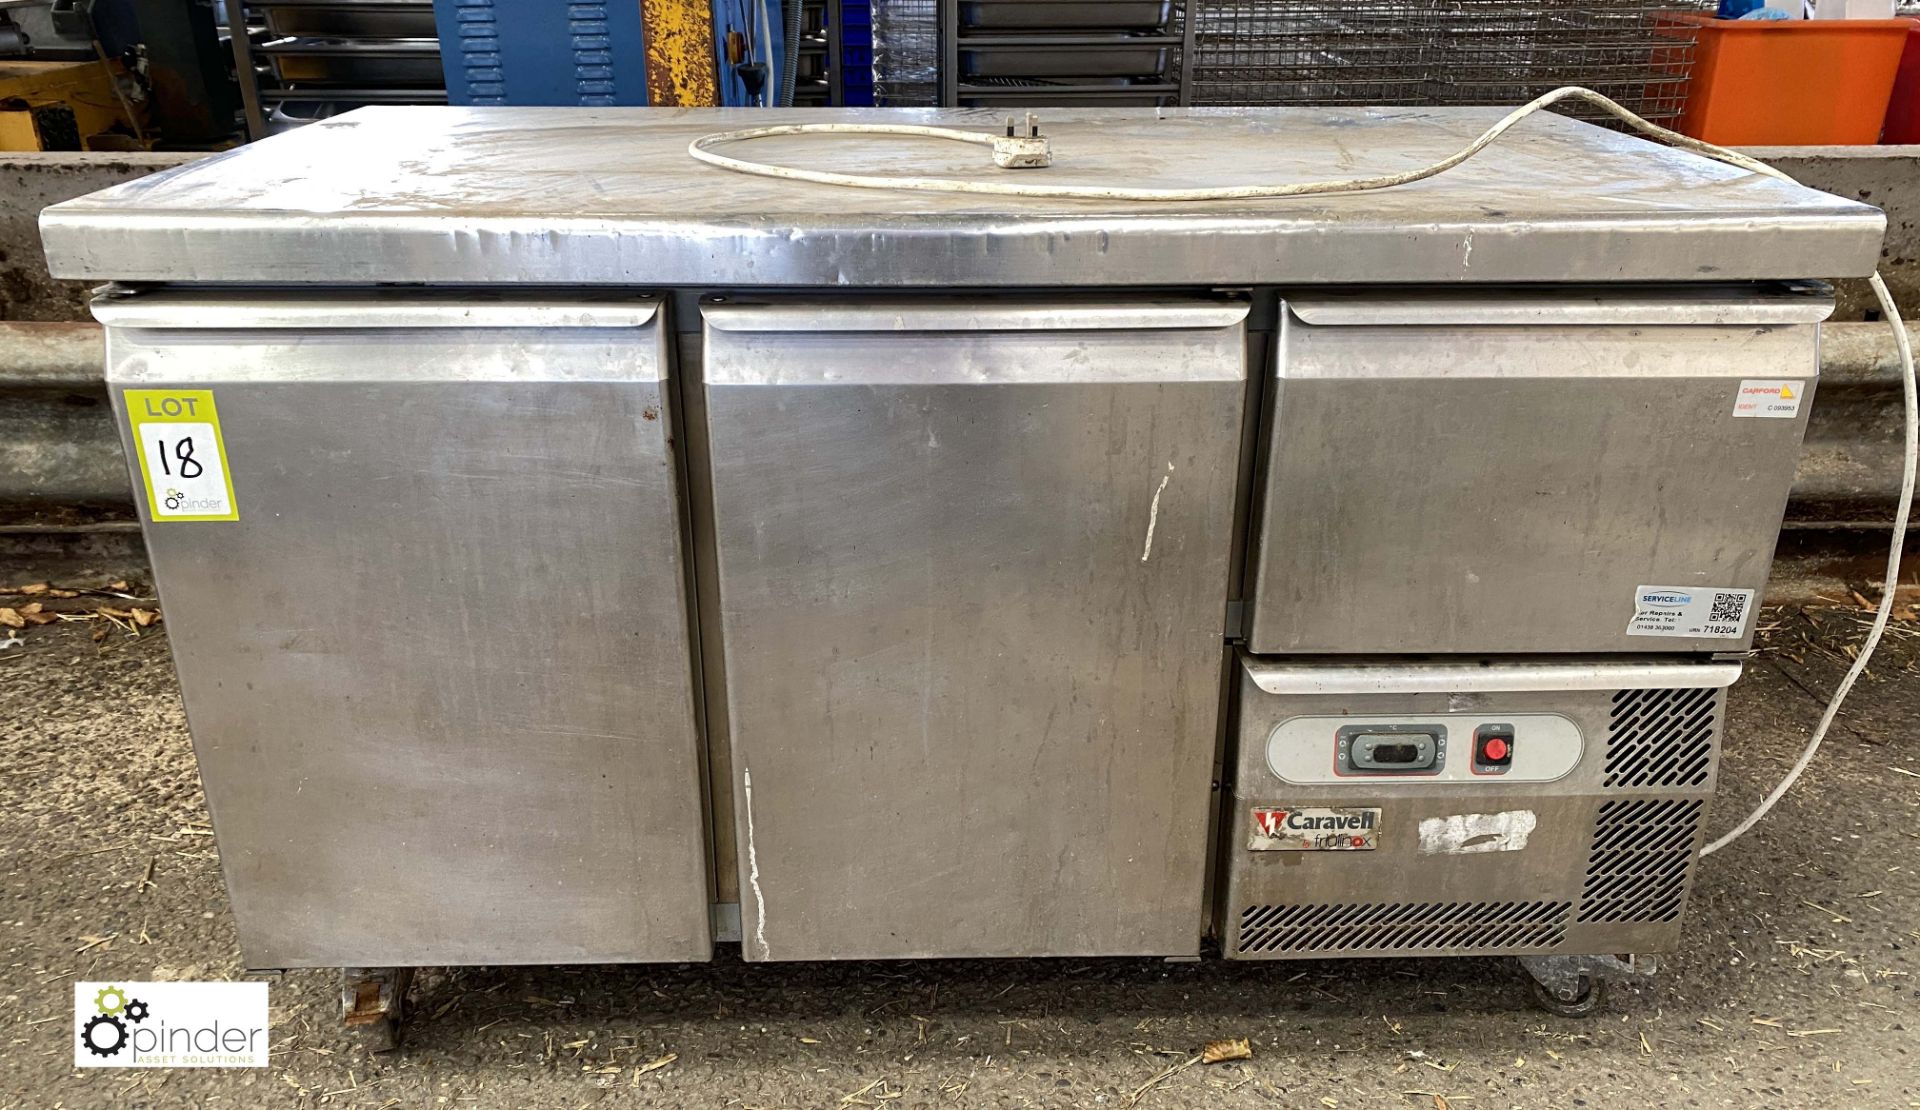 Caravell TR37 stainless steel mobile 2-door Fridge Counter, 240volts (LOCATION: Croxton) / (please